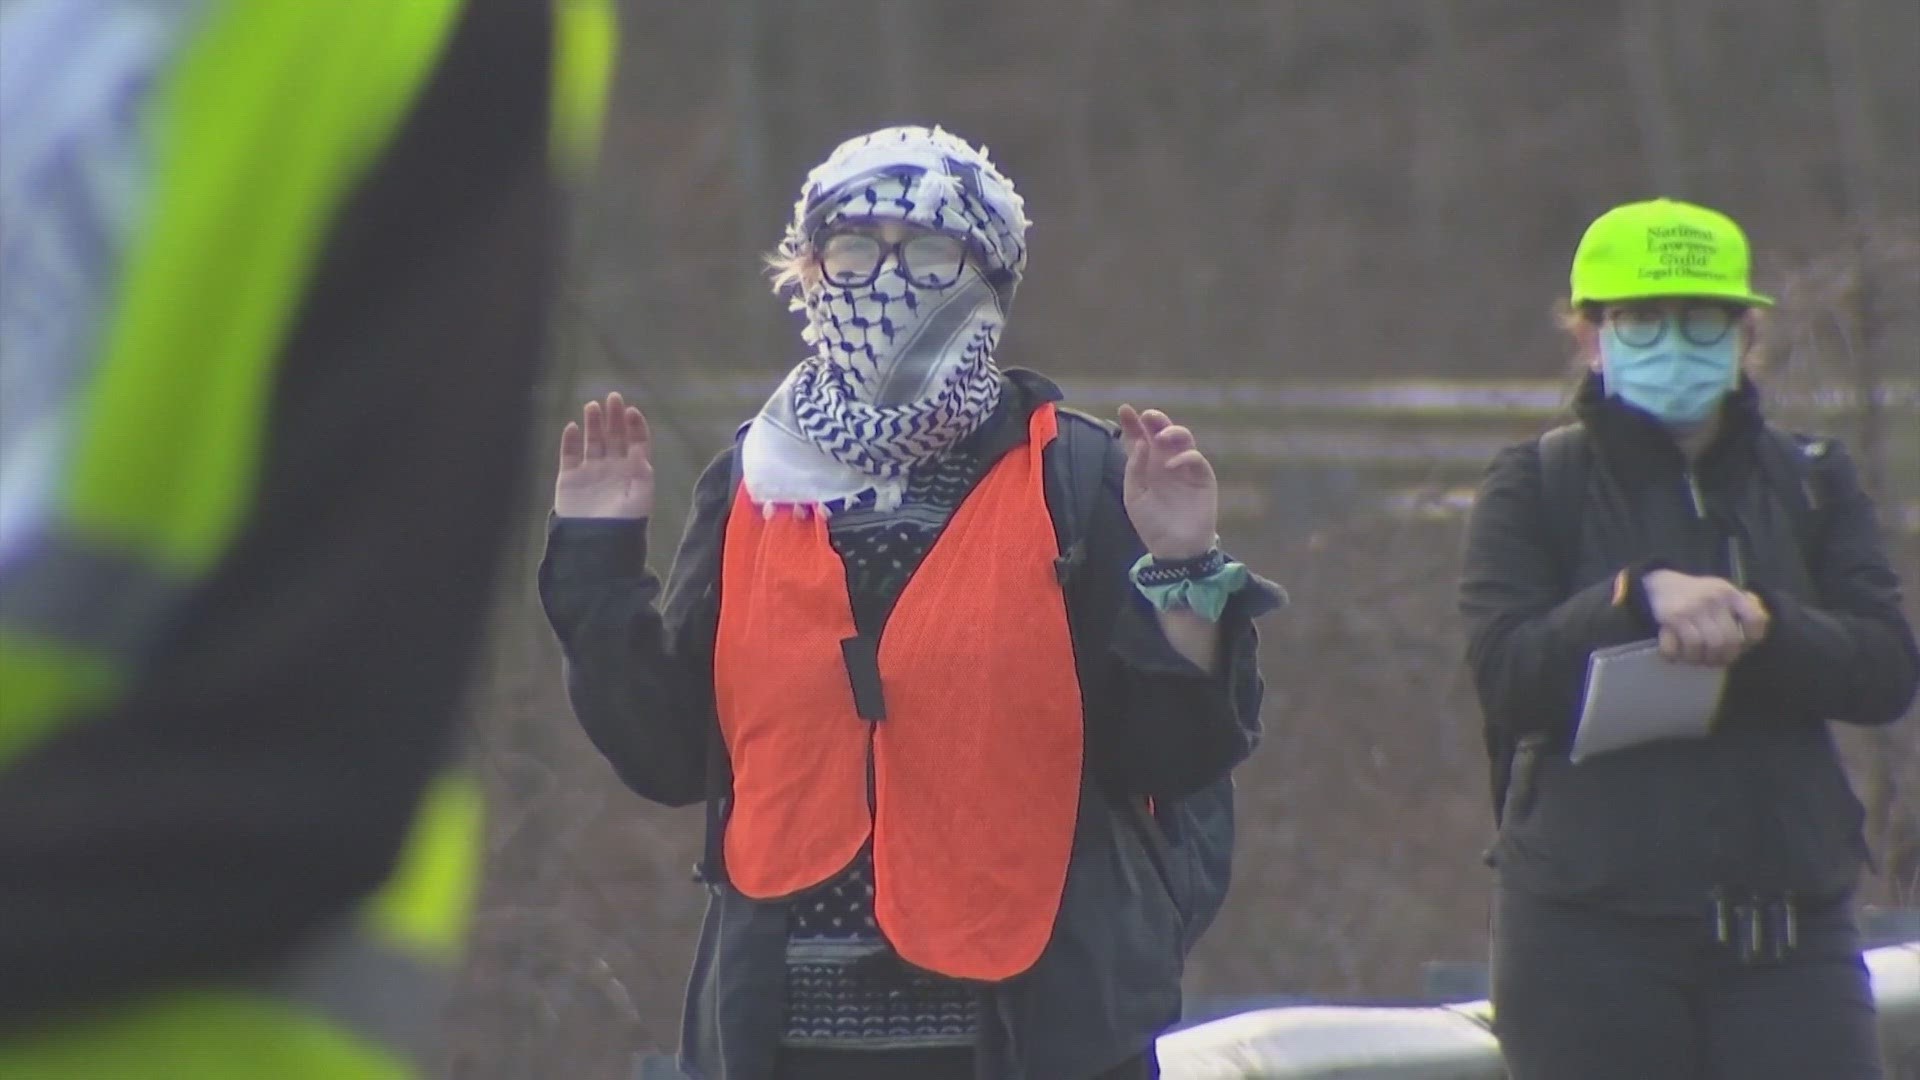 Police in Connecticut arrested 10 people accused of their role in shutting down the road outside a contractor that signed a deal with Israel.